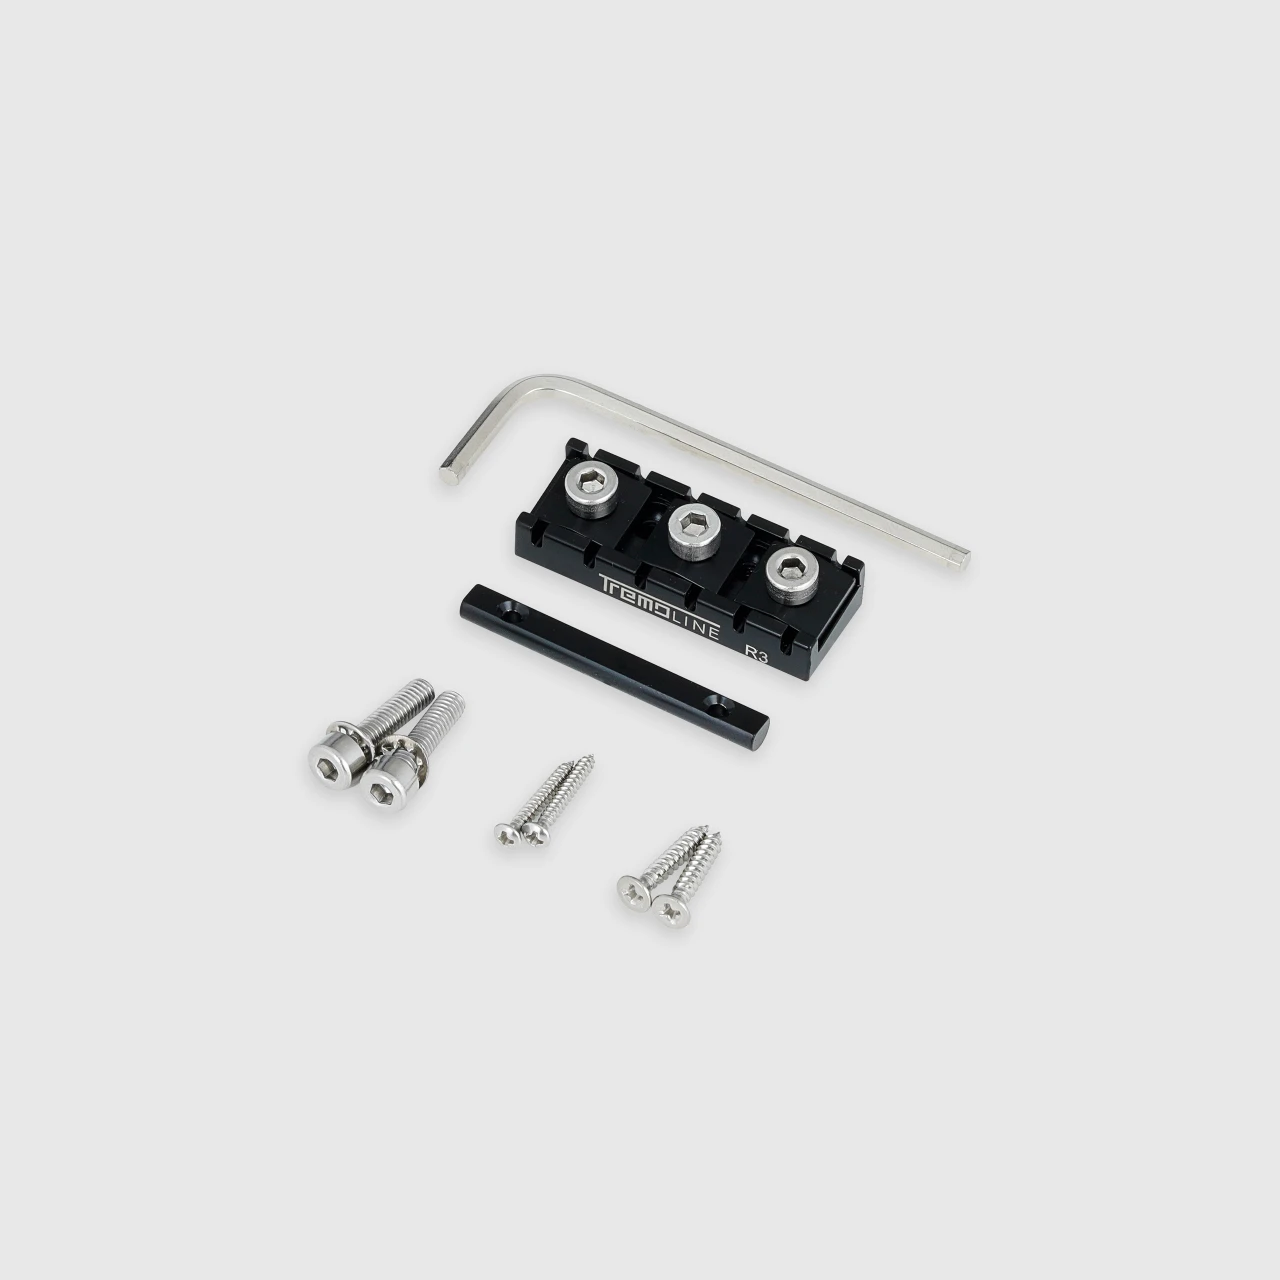 <img src=”Tremoline-Tremolo-system-flat-top-FT36T-R3-BS_6” width="1280" height="1280" alt=”locking nut set of the Tremoline FT36T tremolo from the rear side” />